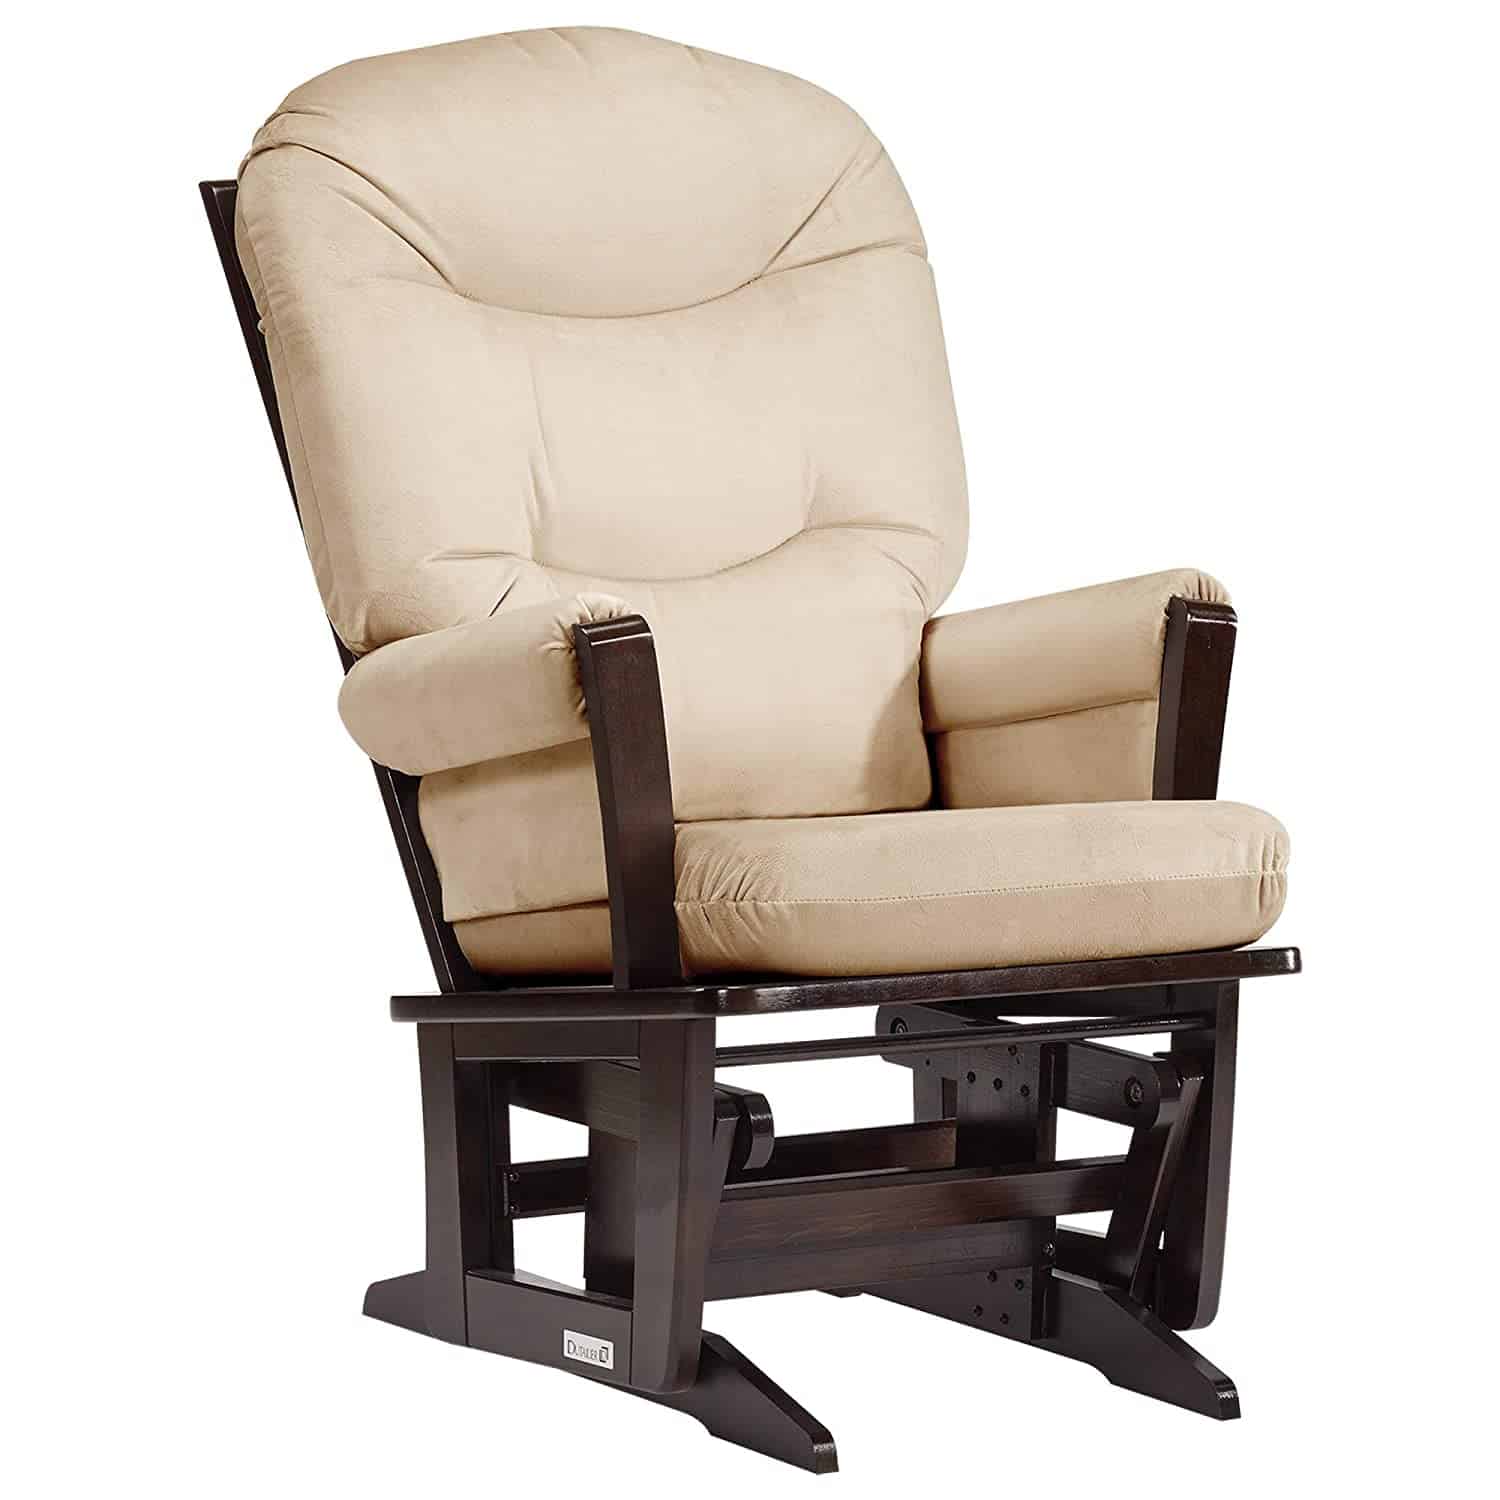 double wide glider chair